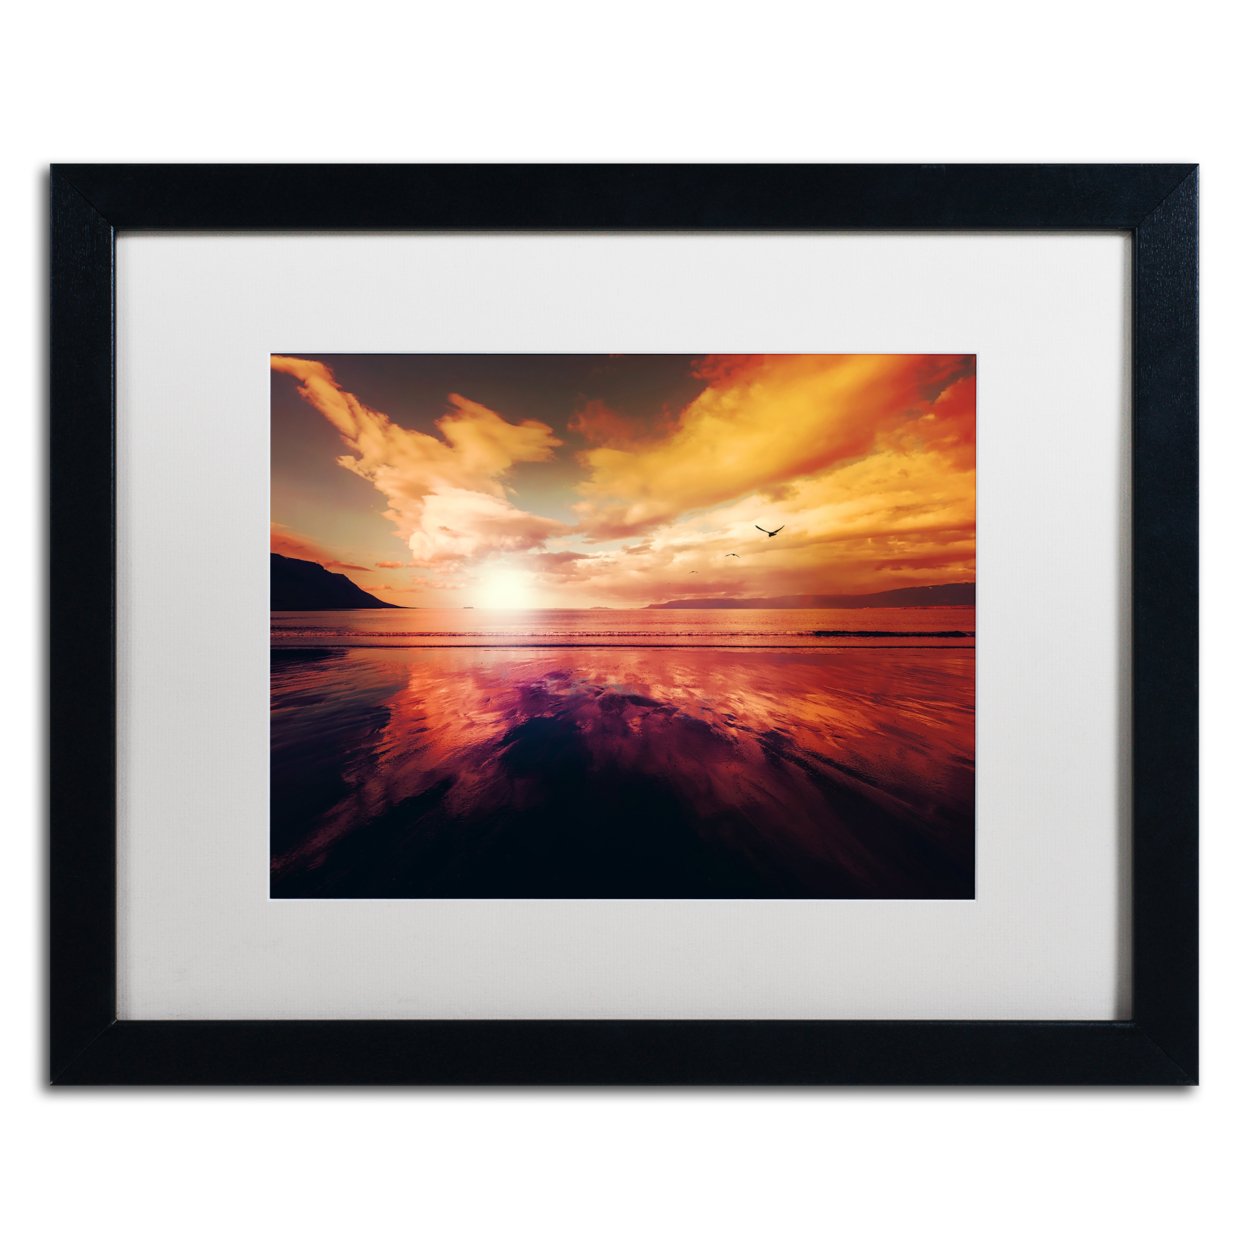 Philippe Sainte-Laudy 'The Light Side Of The Sun' Black Wooden Framed Art 18 X 22 Inches